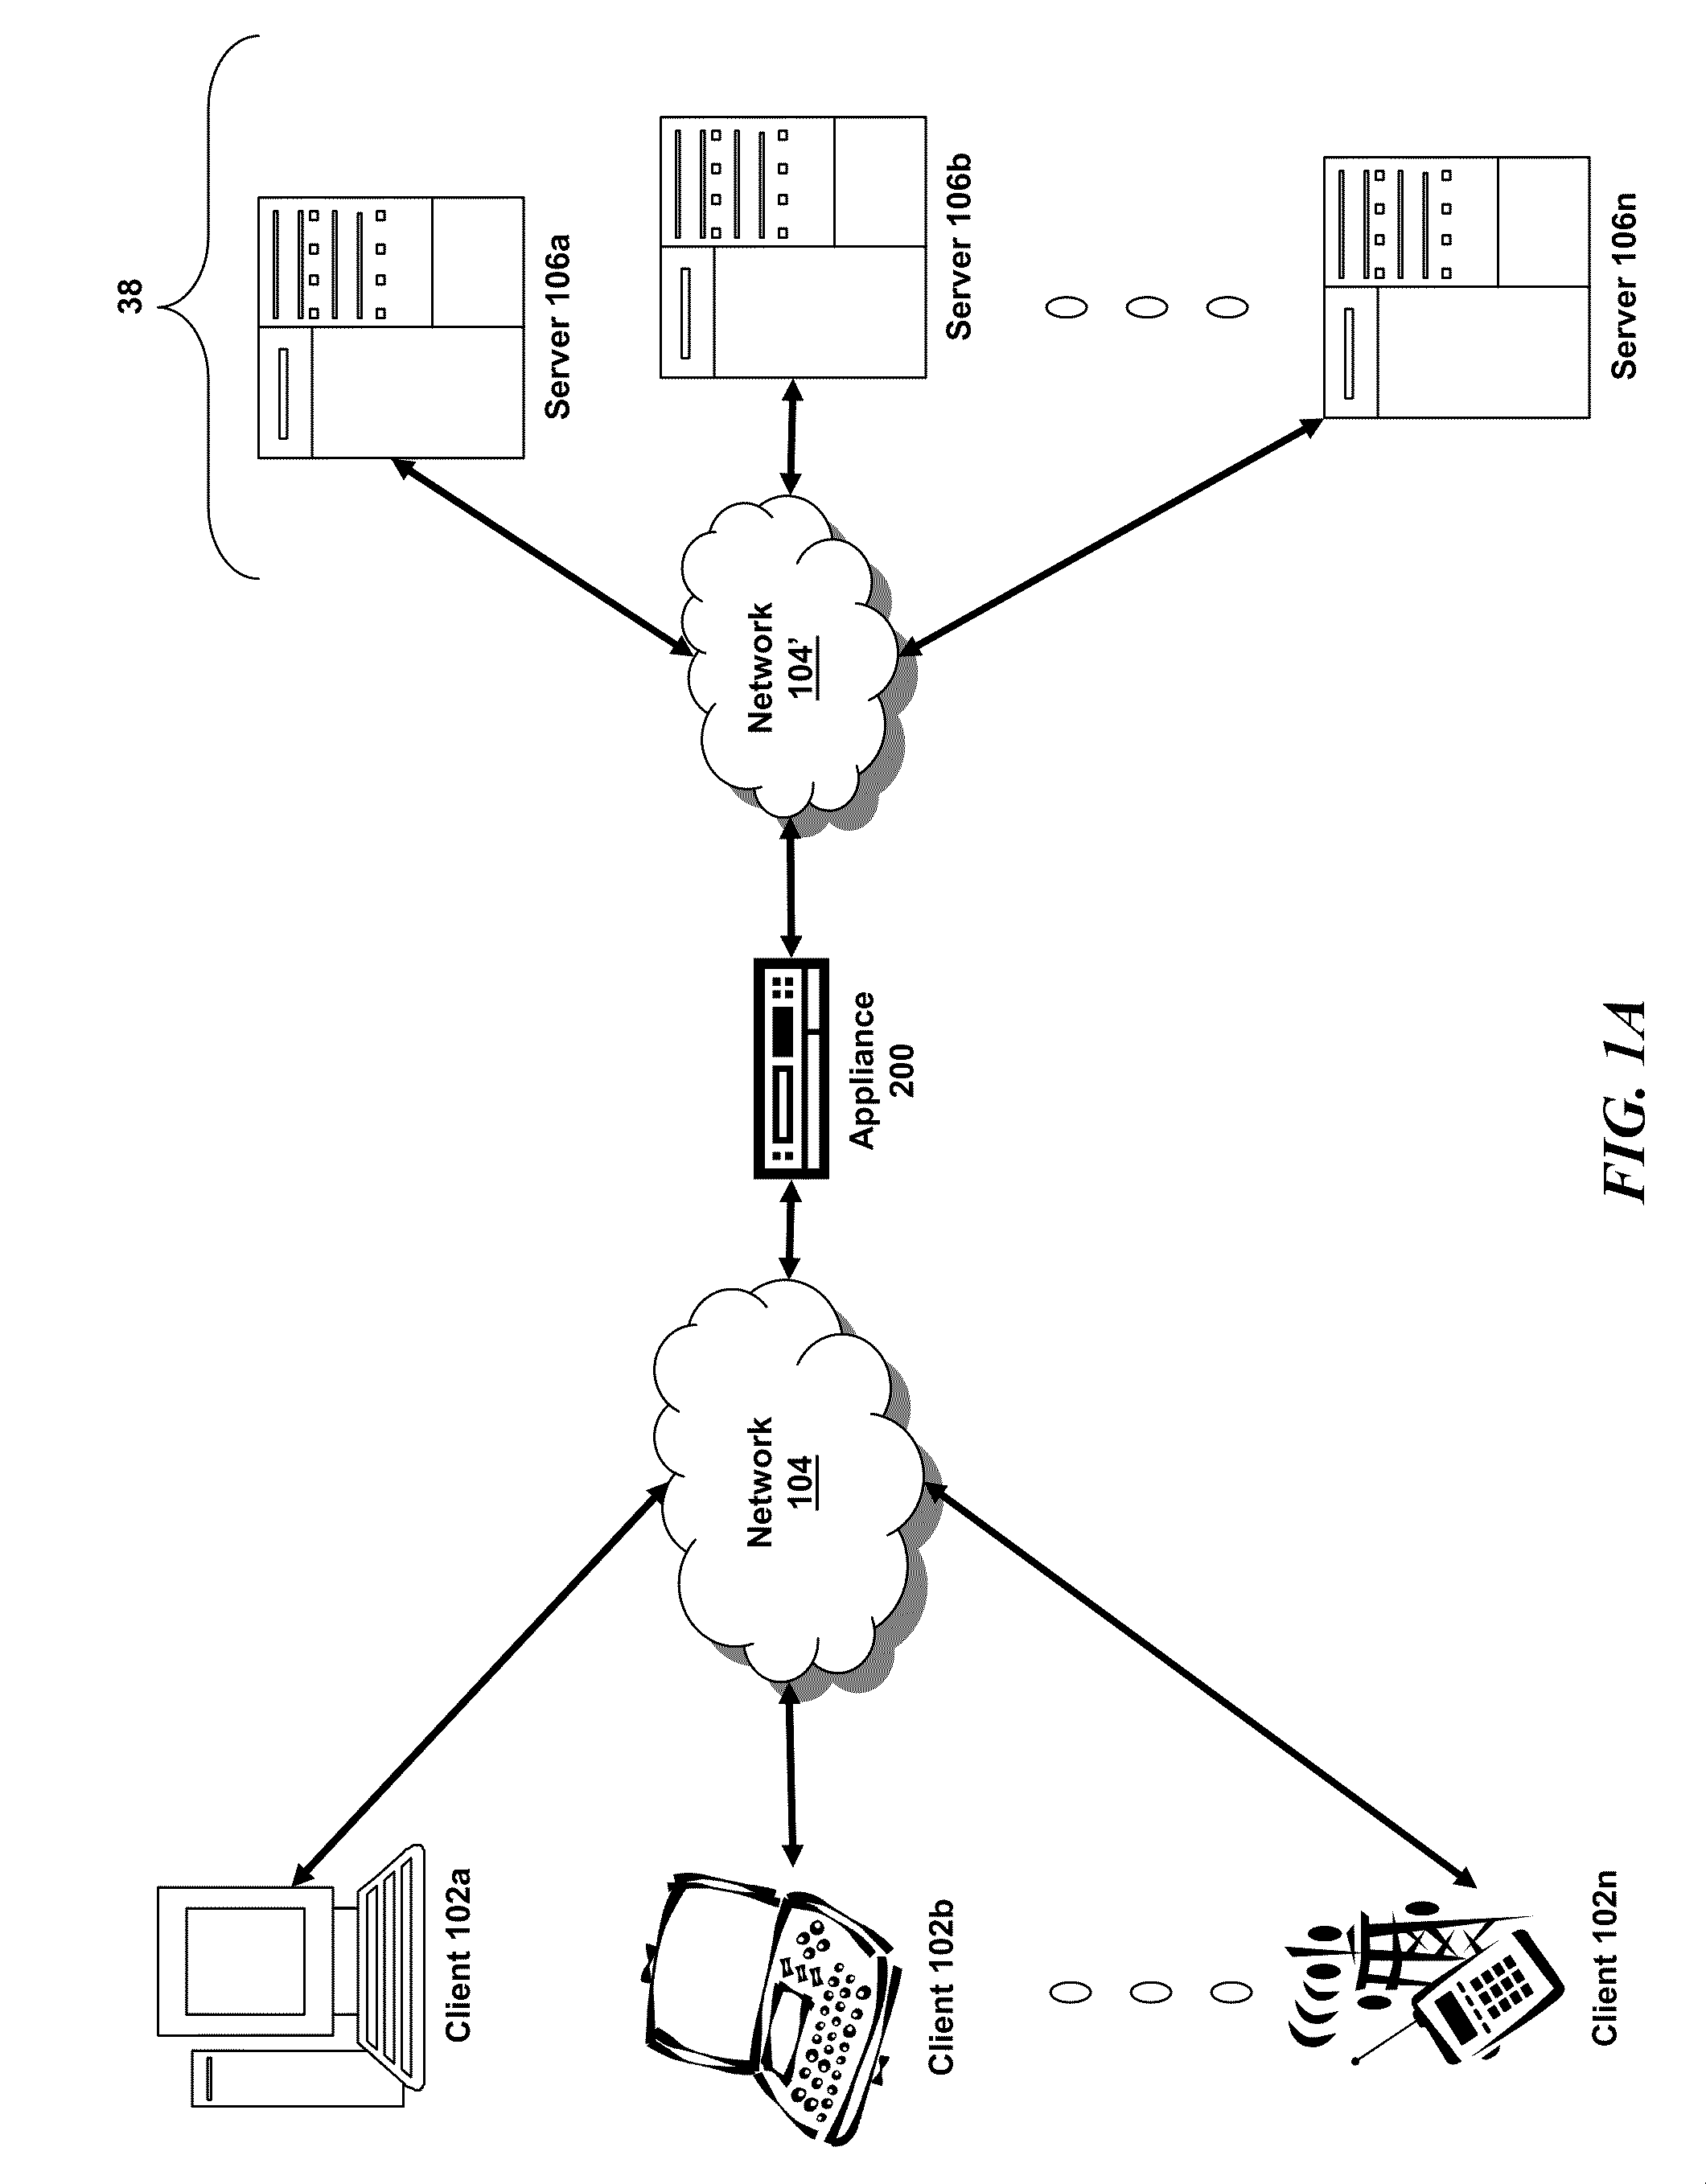 Systems and methods for aaa-traffic management information sharing across cores in a multi-core system